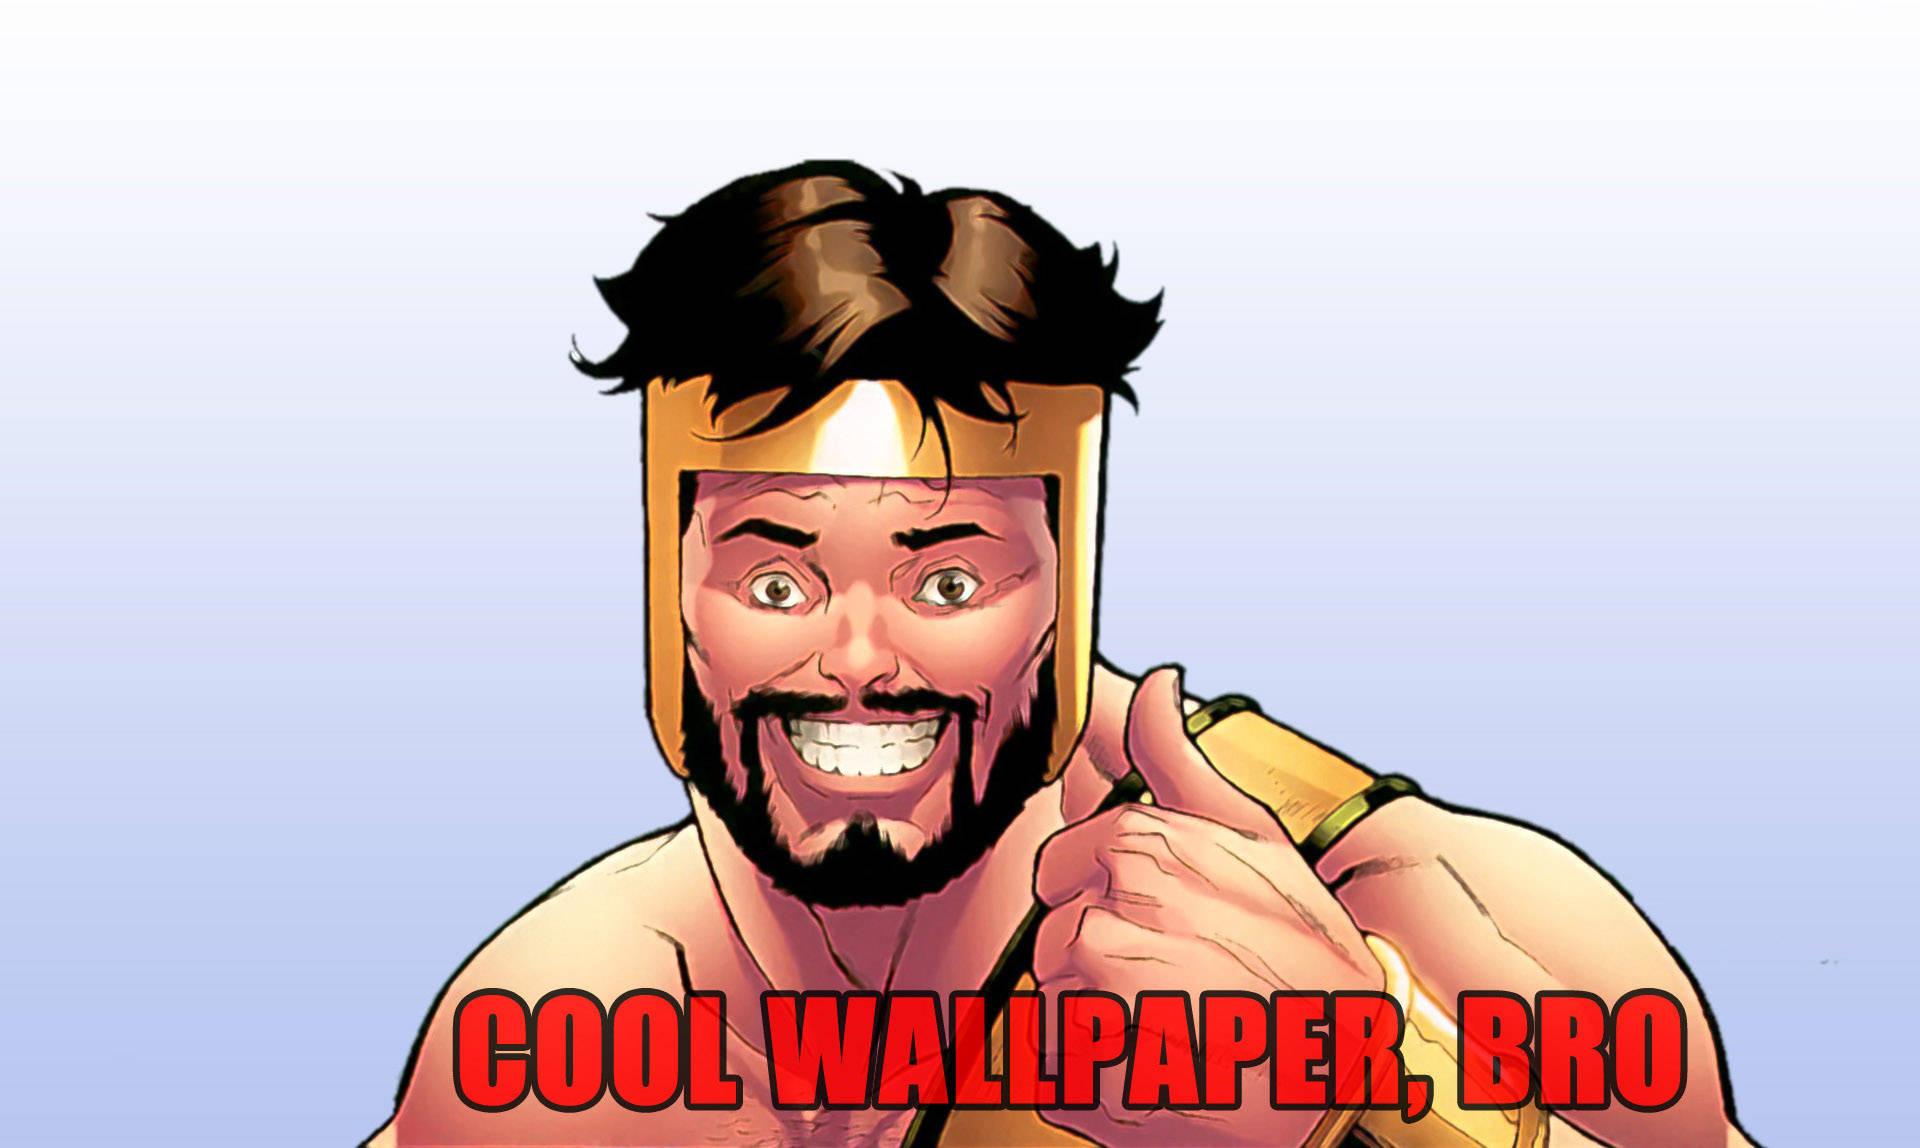 Hey bro, let's just keep it cool Wallpaper